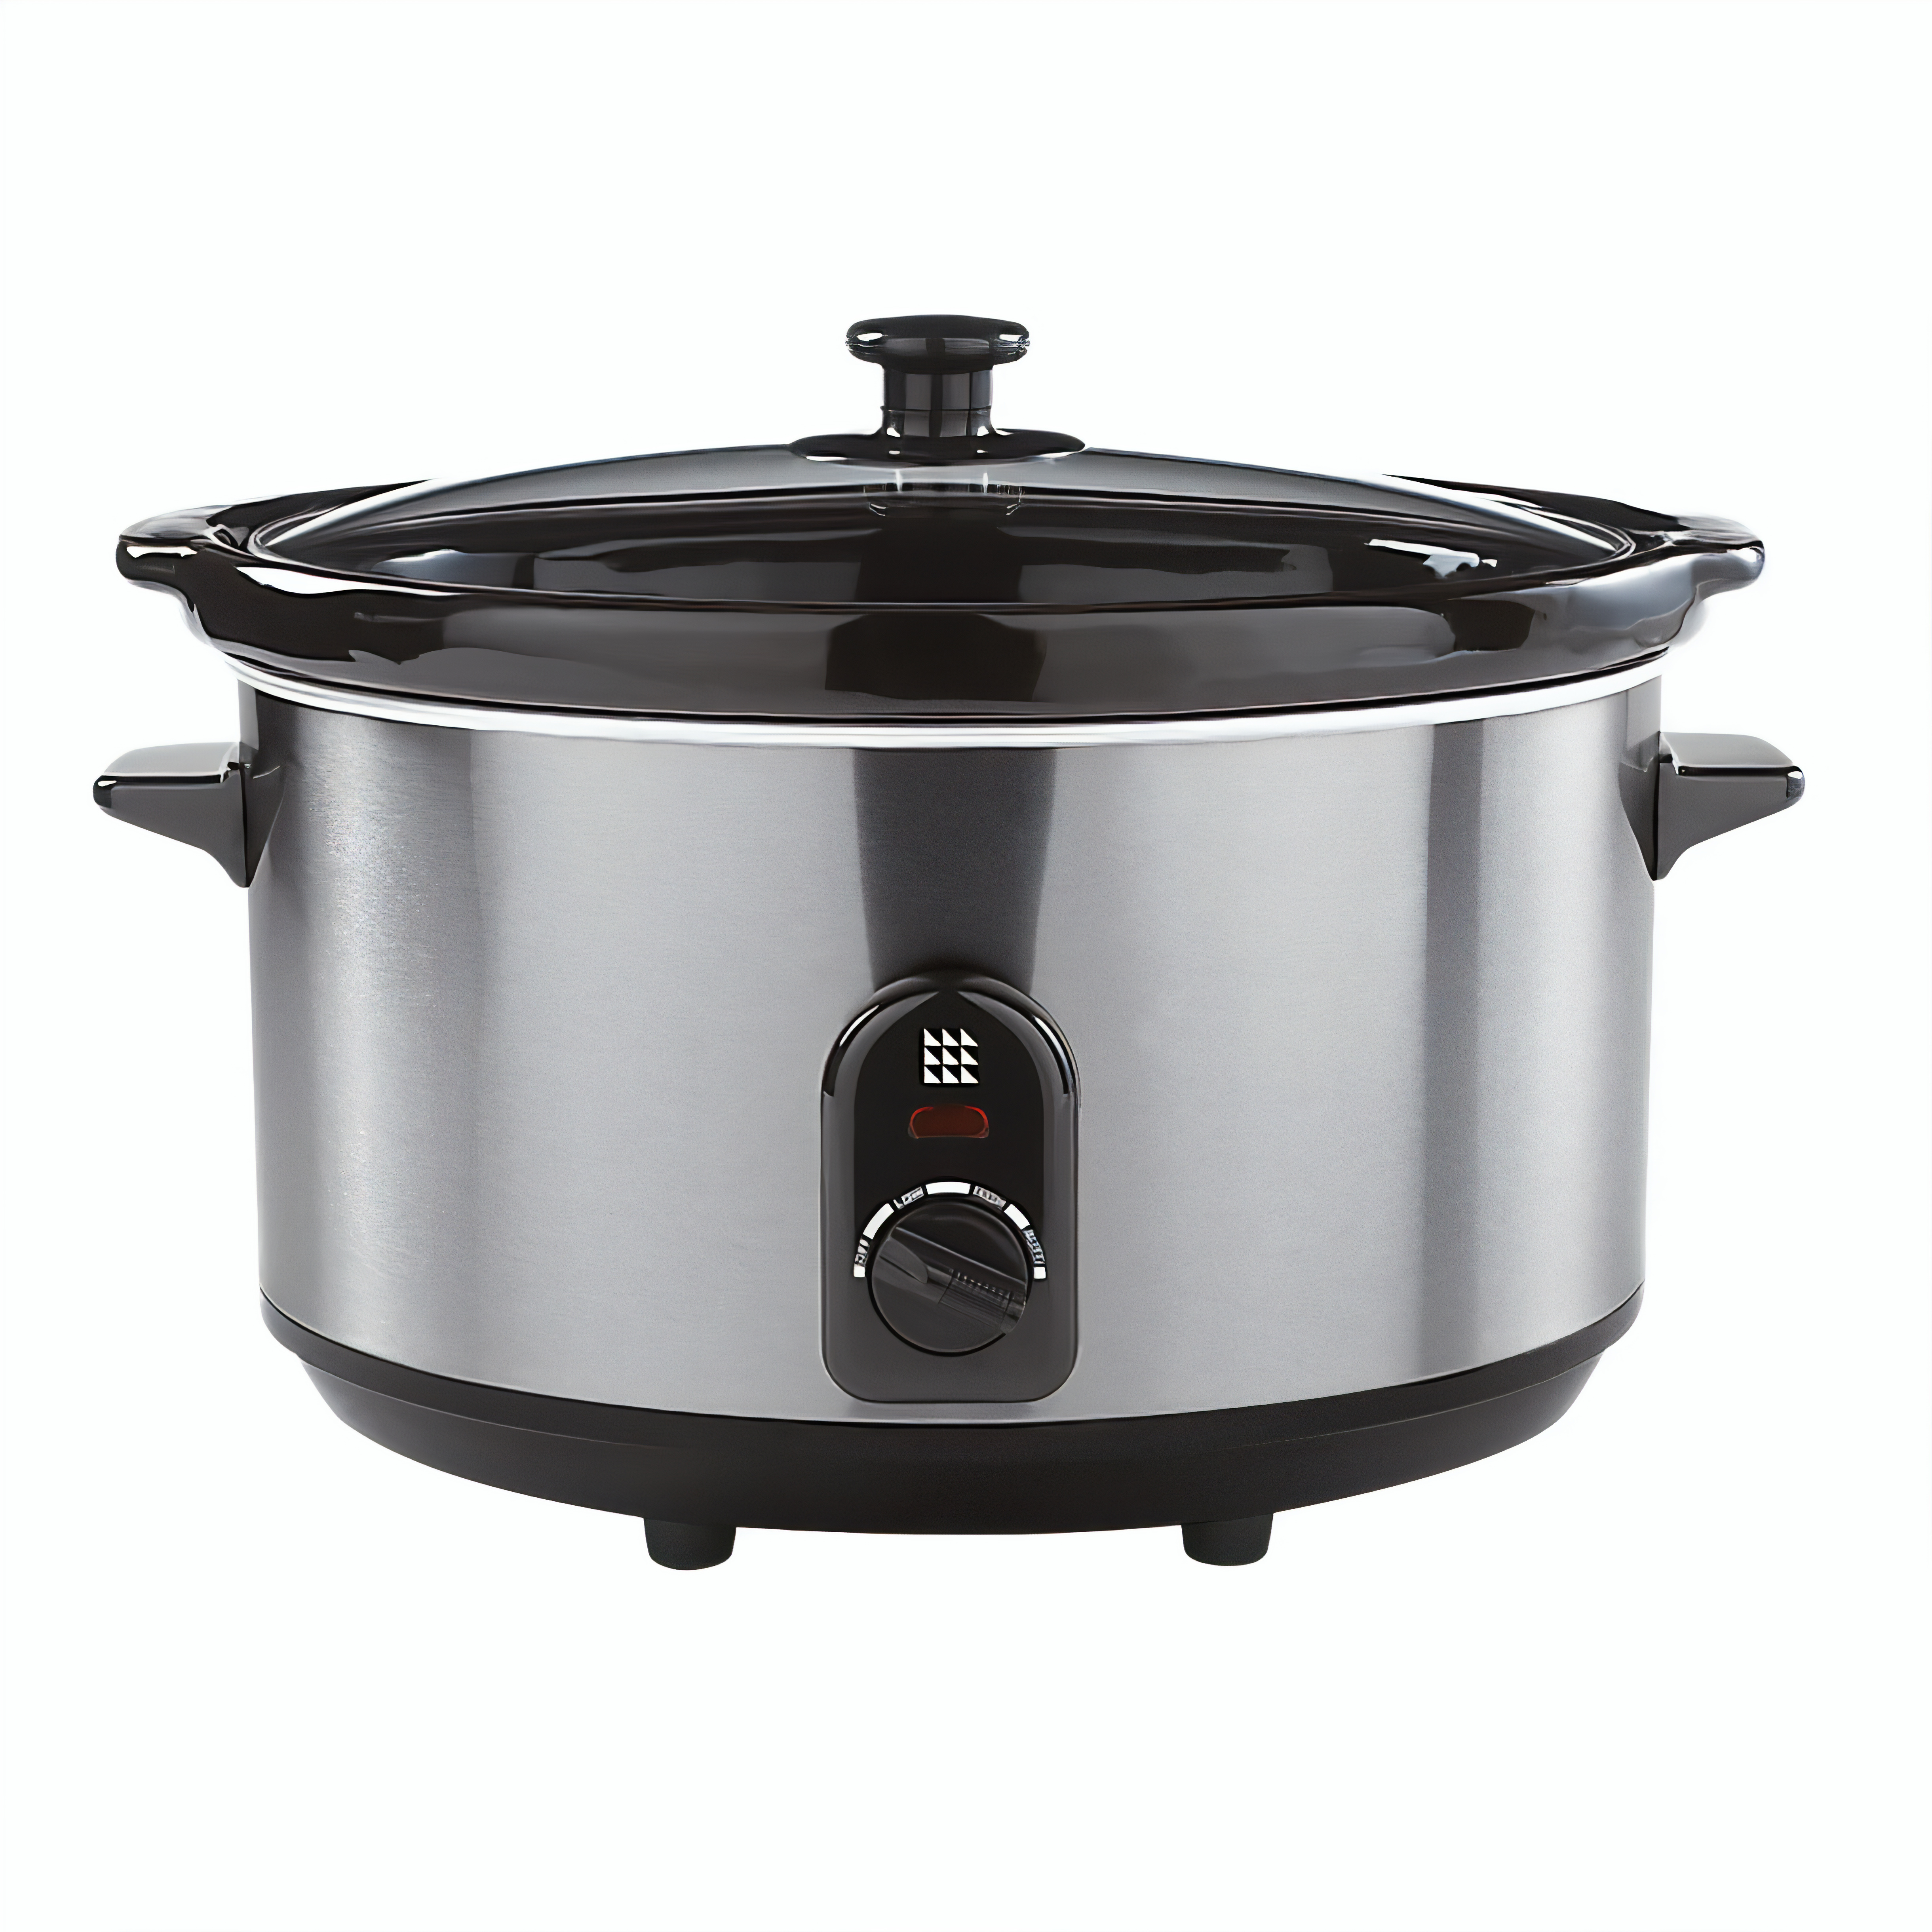 Lakeland's six-litre slow cooker is just £29.99